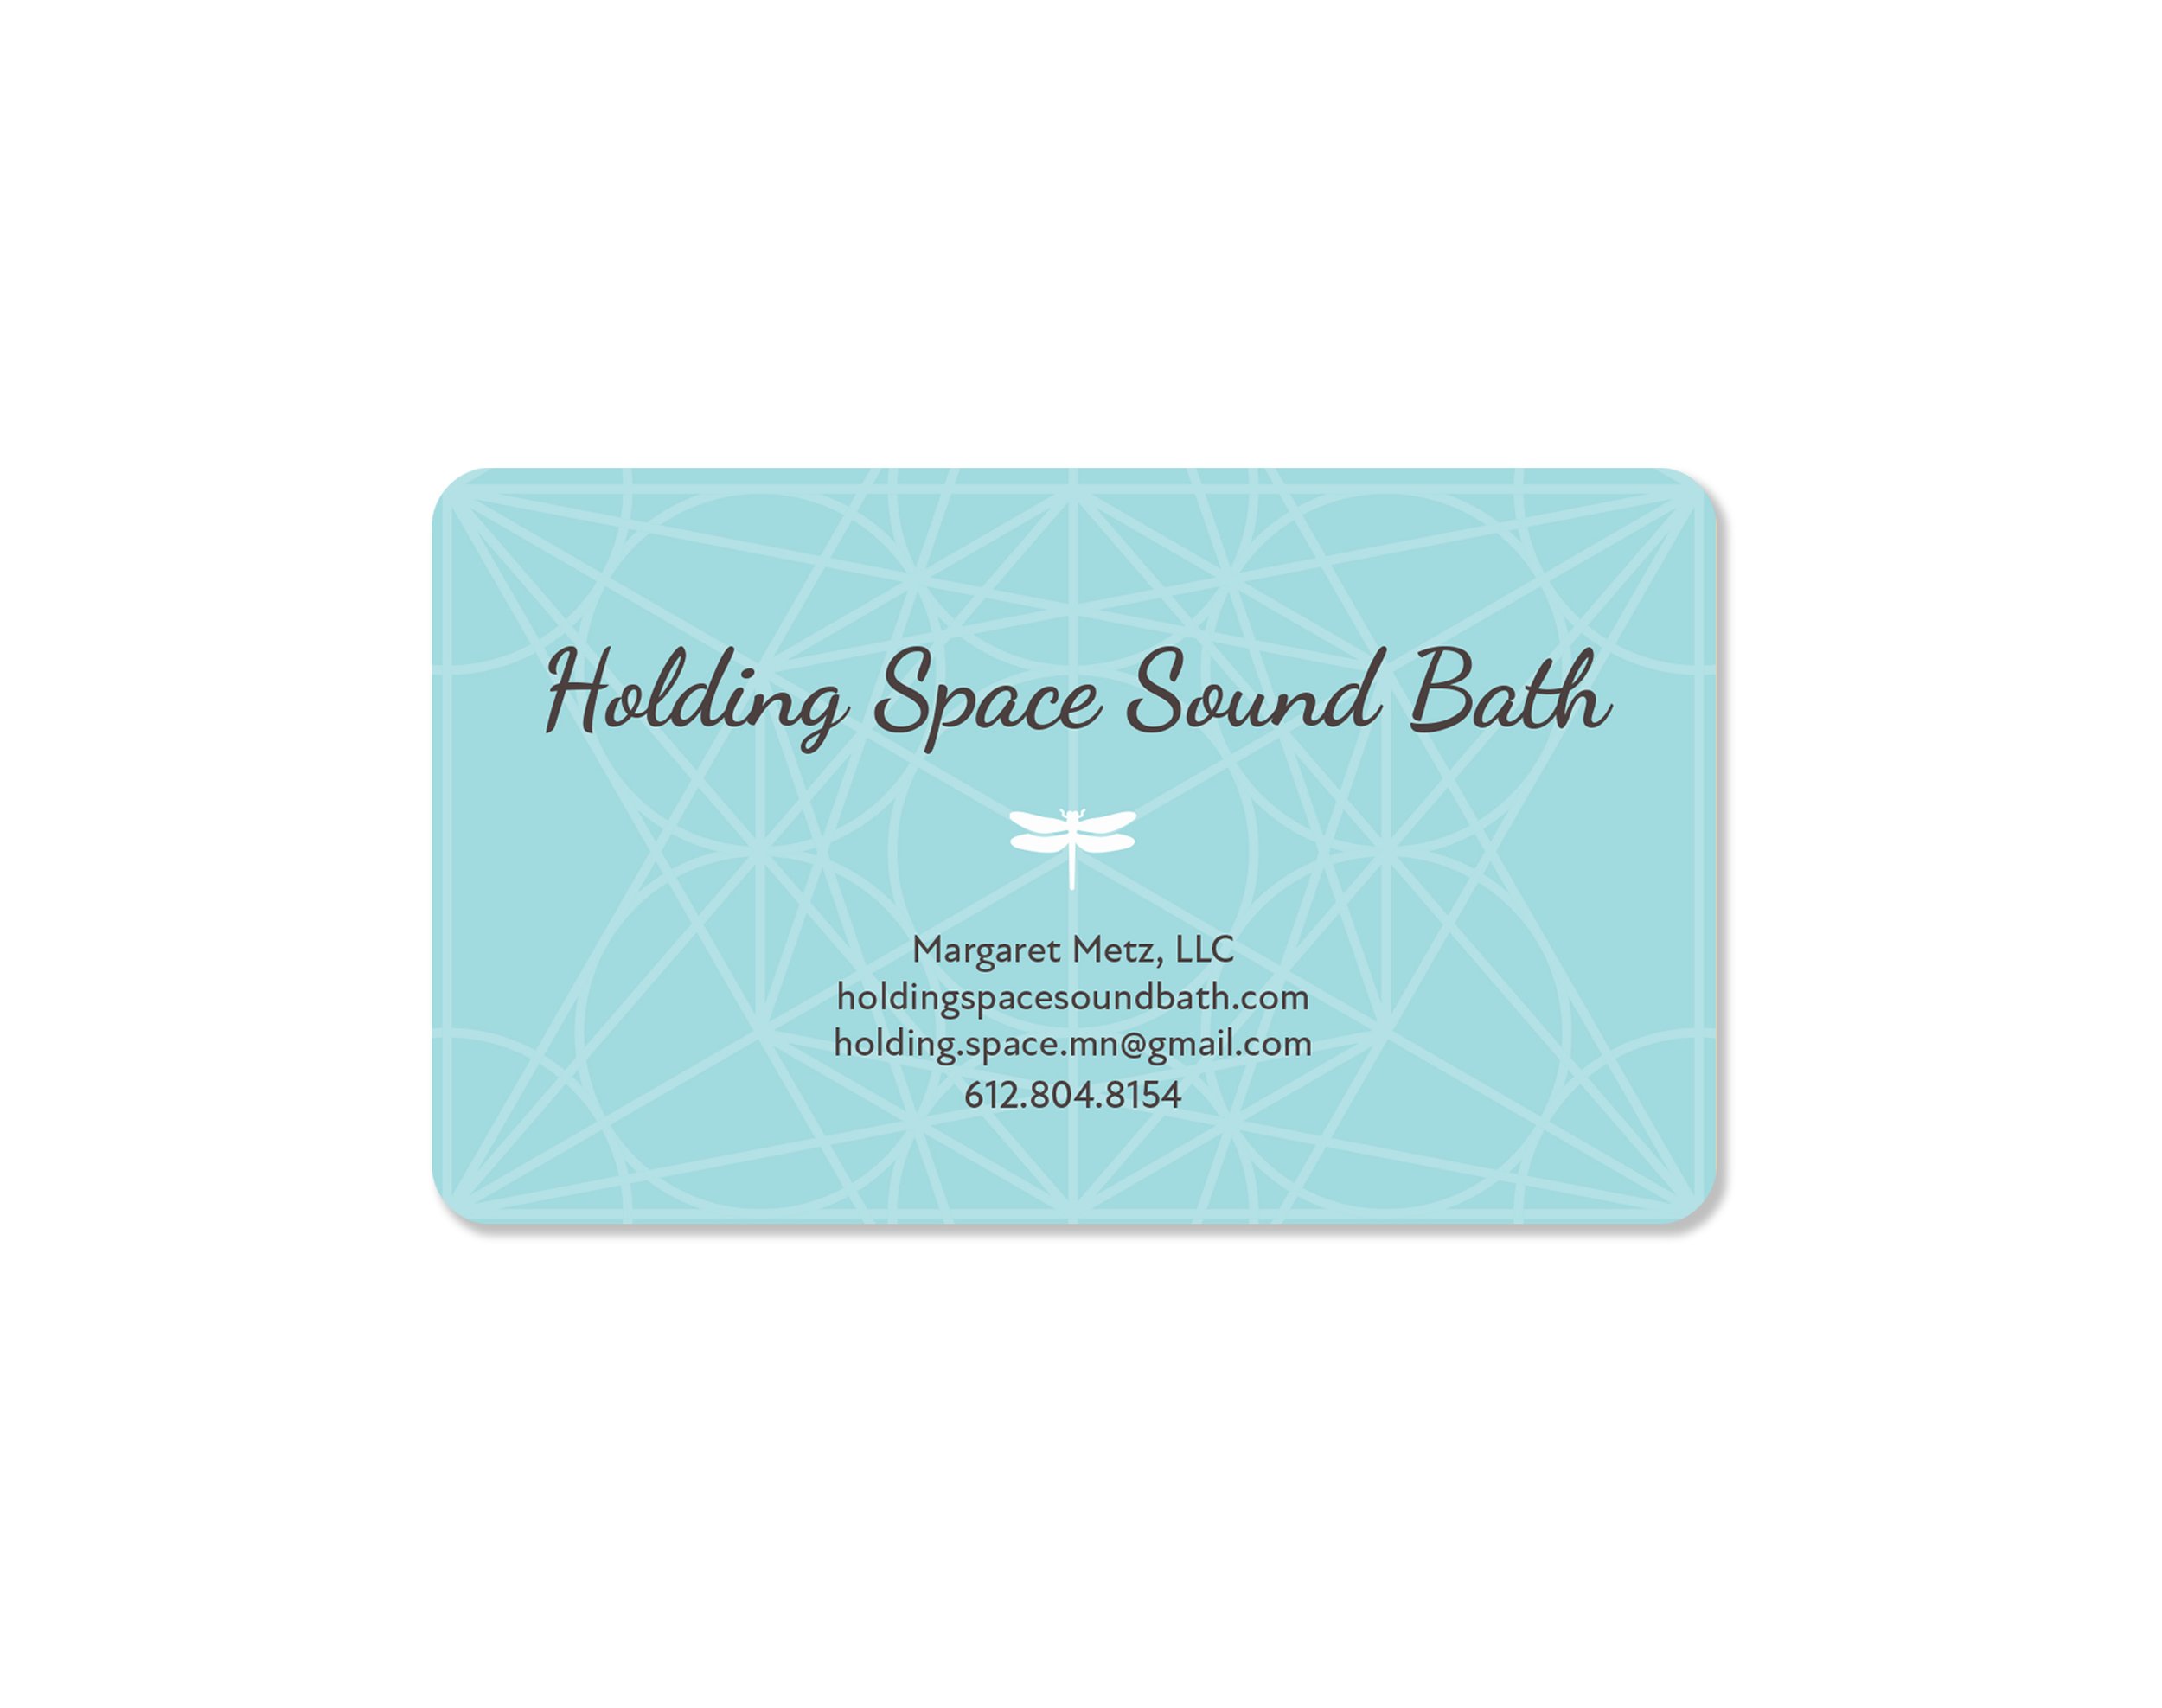 Holding Space Sound Bath Business Card Front